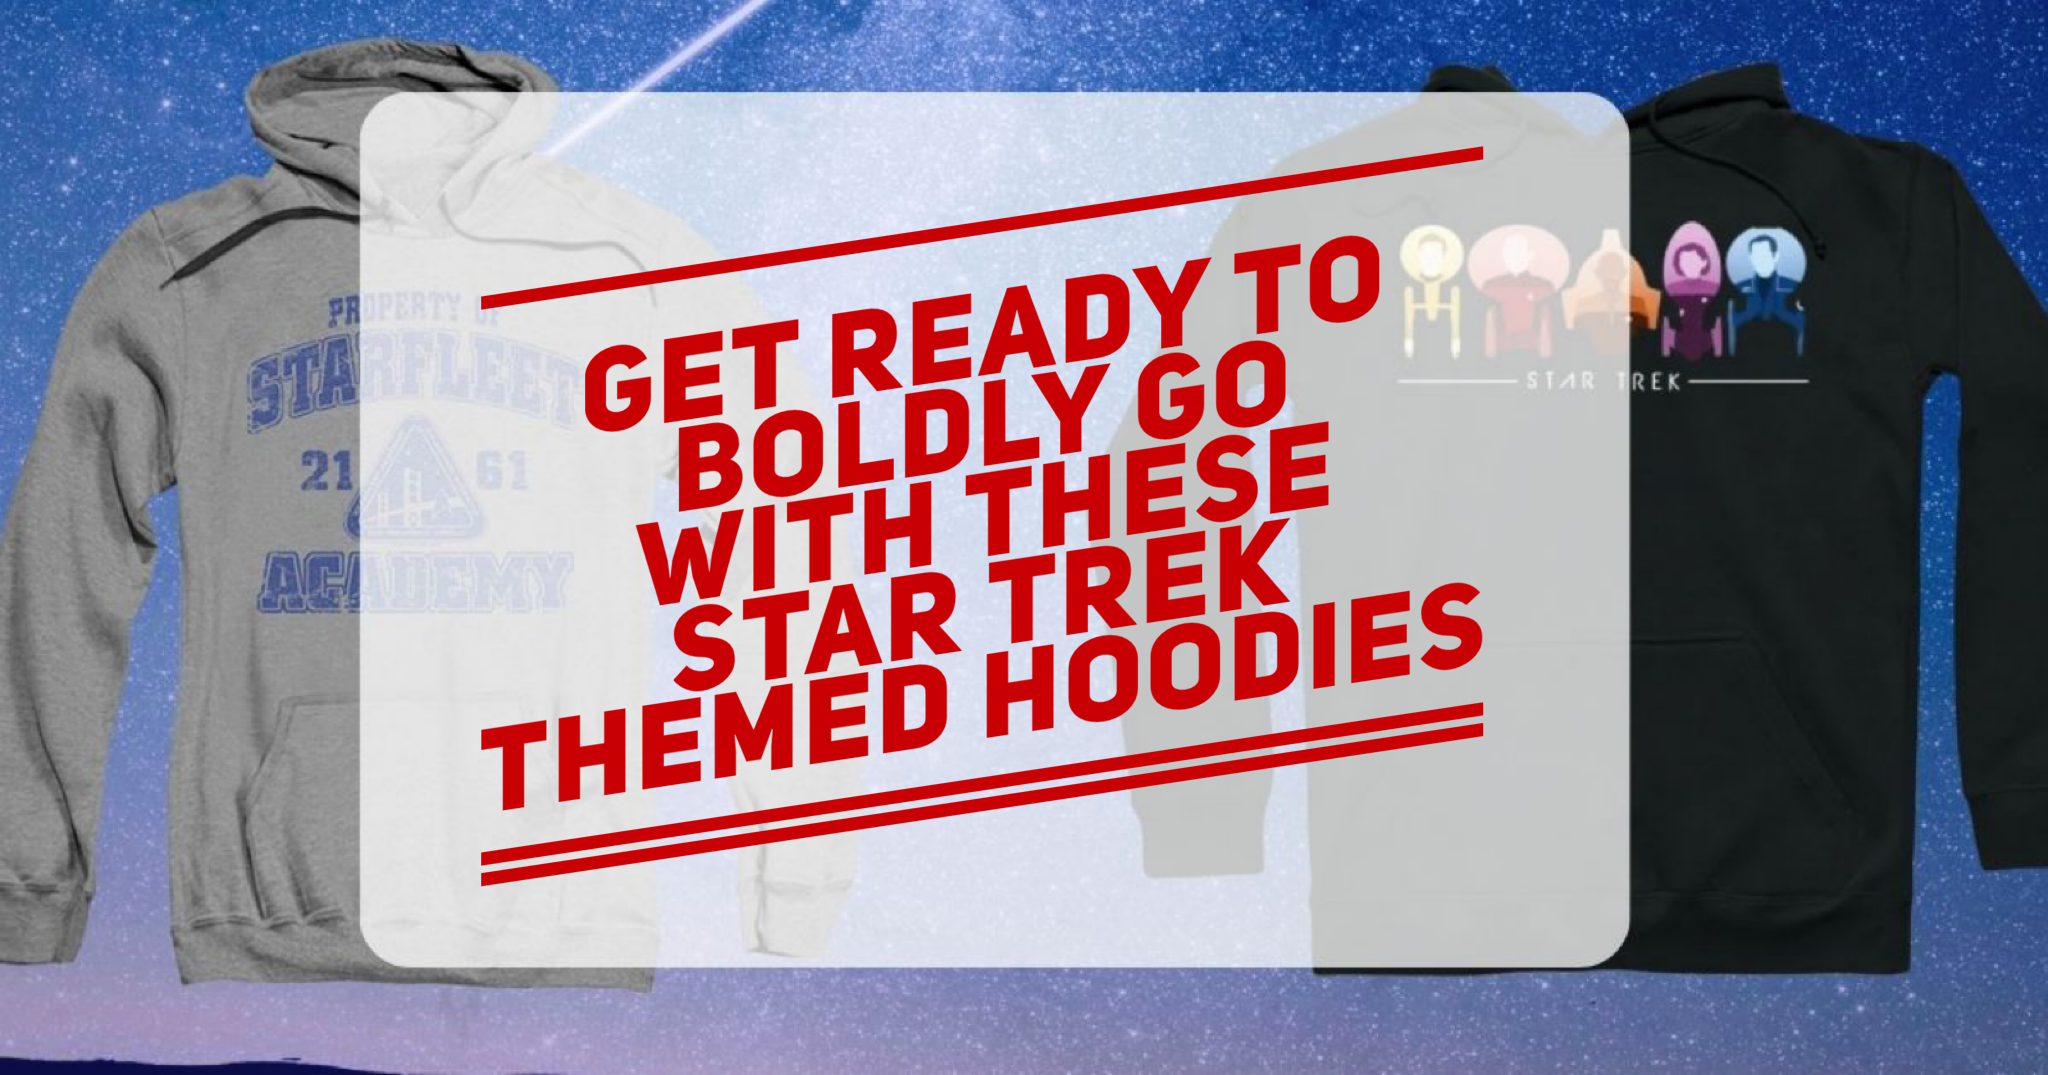 Get Ready to Boldly Go With These Star Trek Themed Hoodies